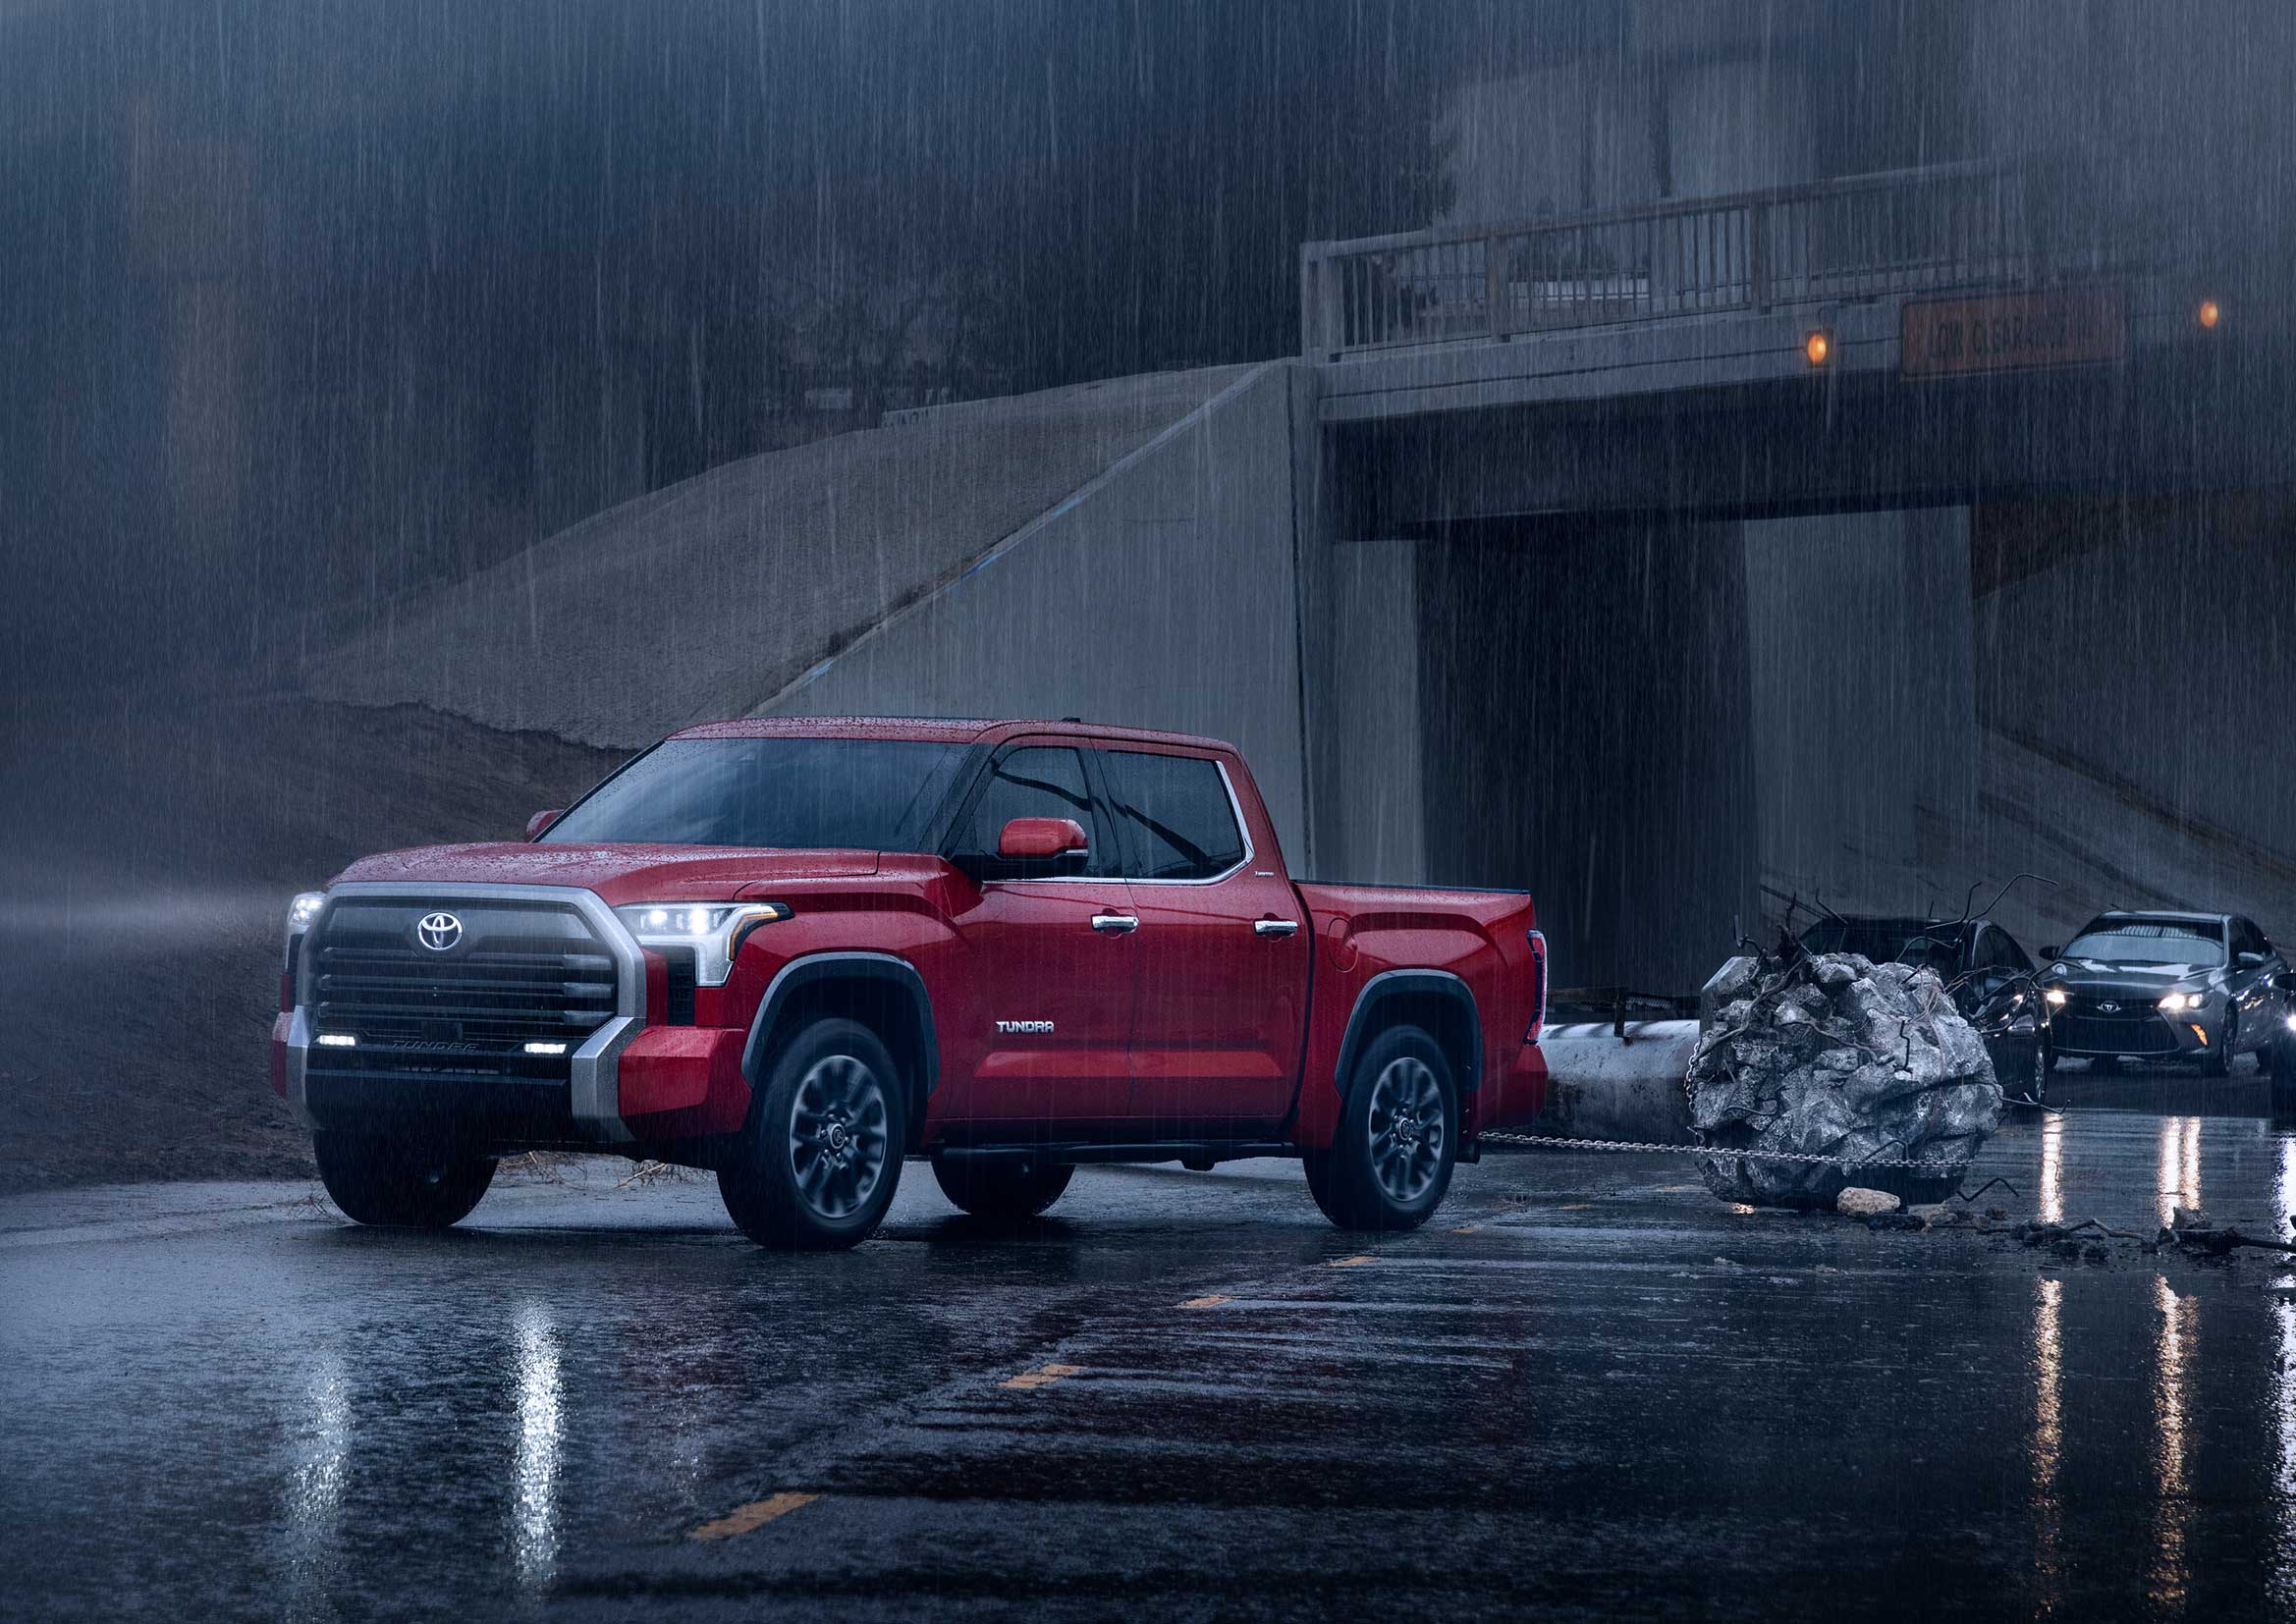 Toyota’s spot “Born to Lend a Hand” by Conill Advertising features the all-new 2022 Toyota Tundra.